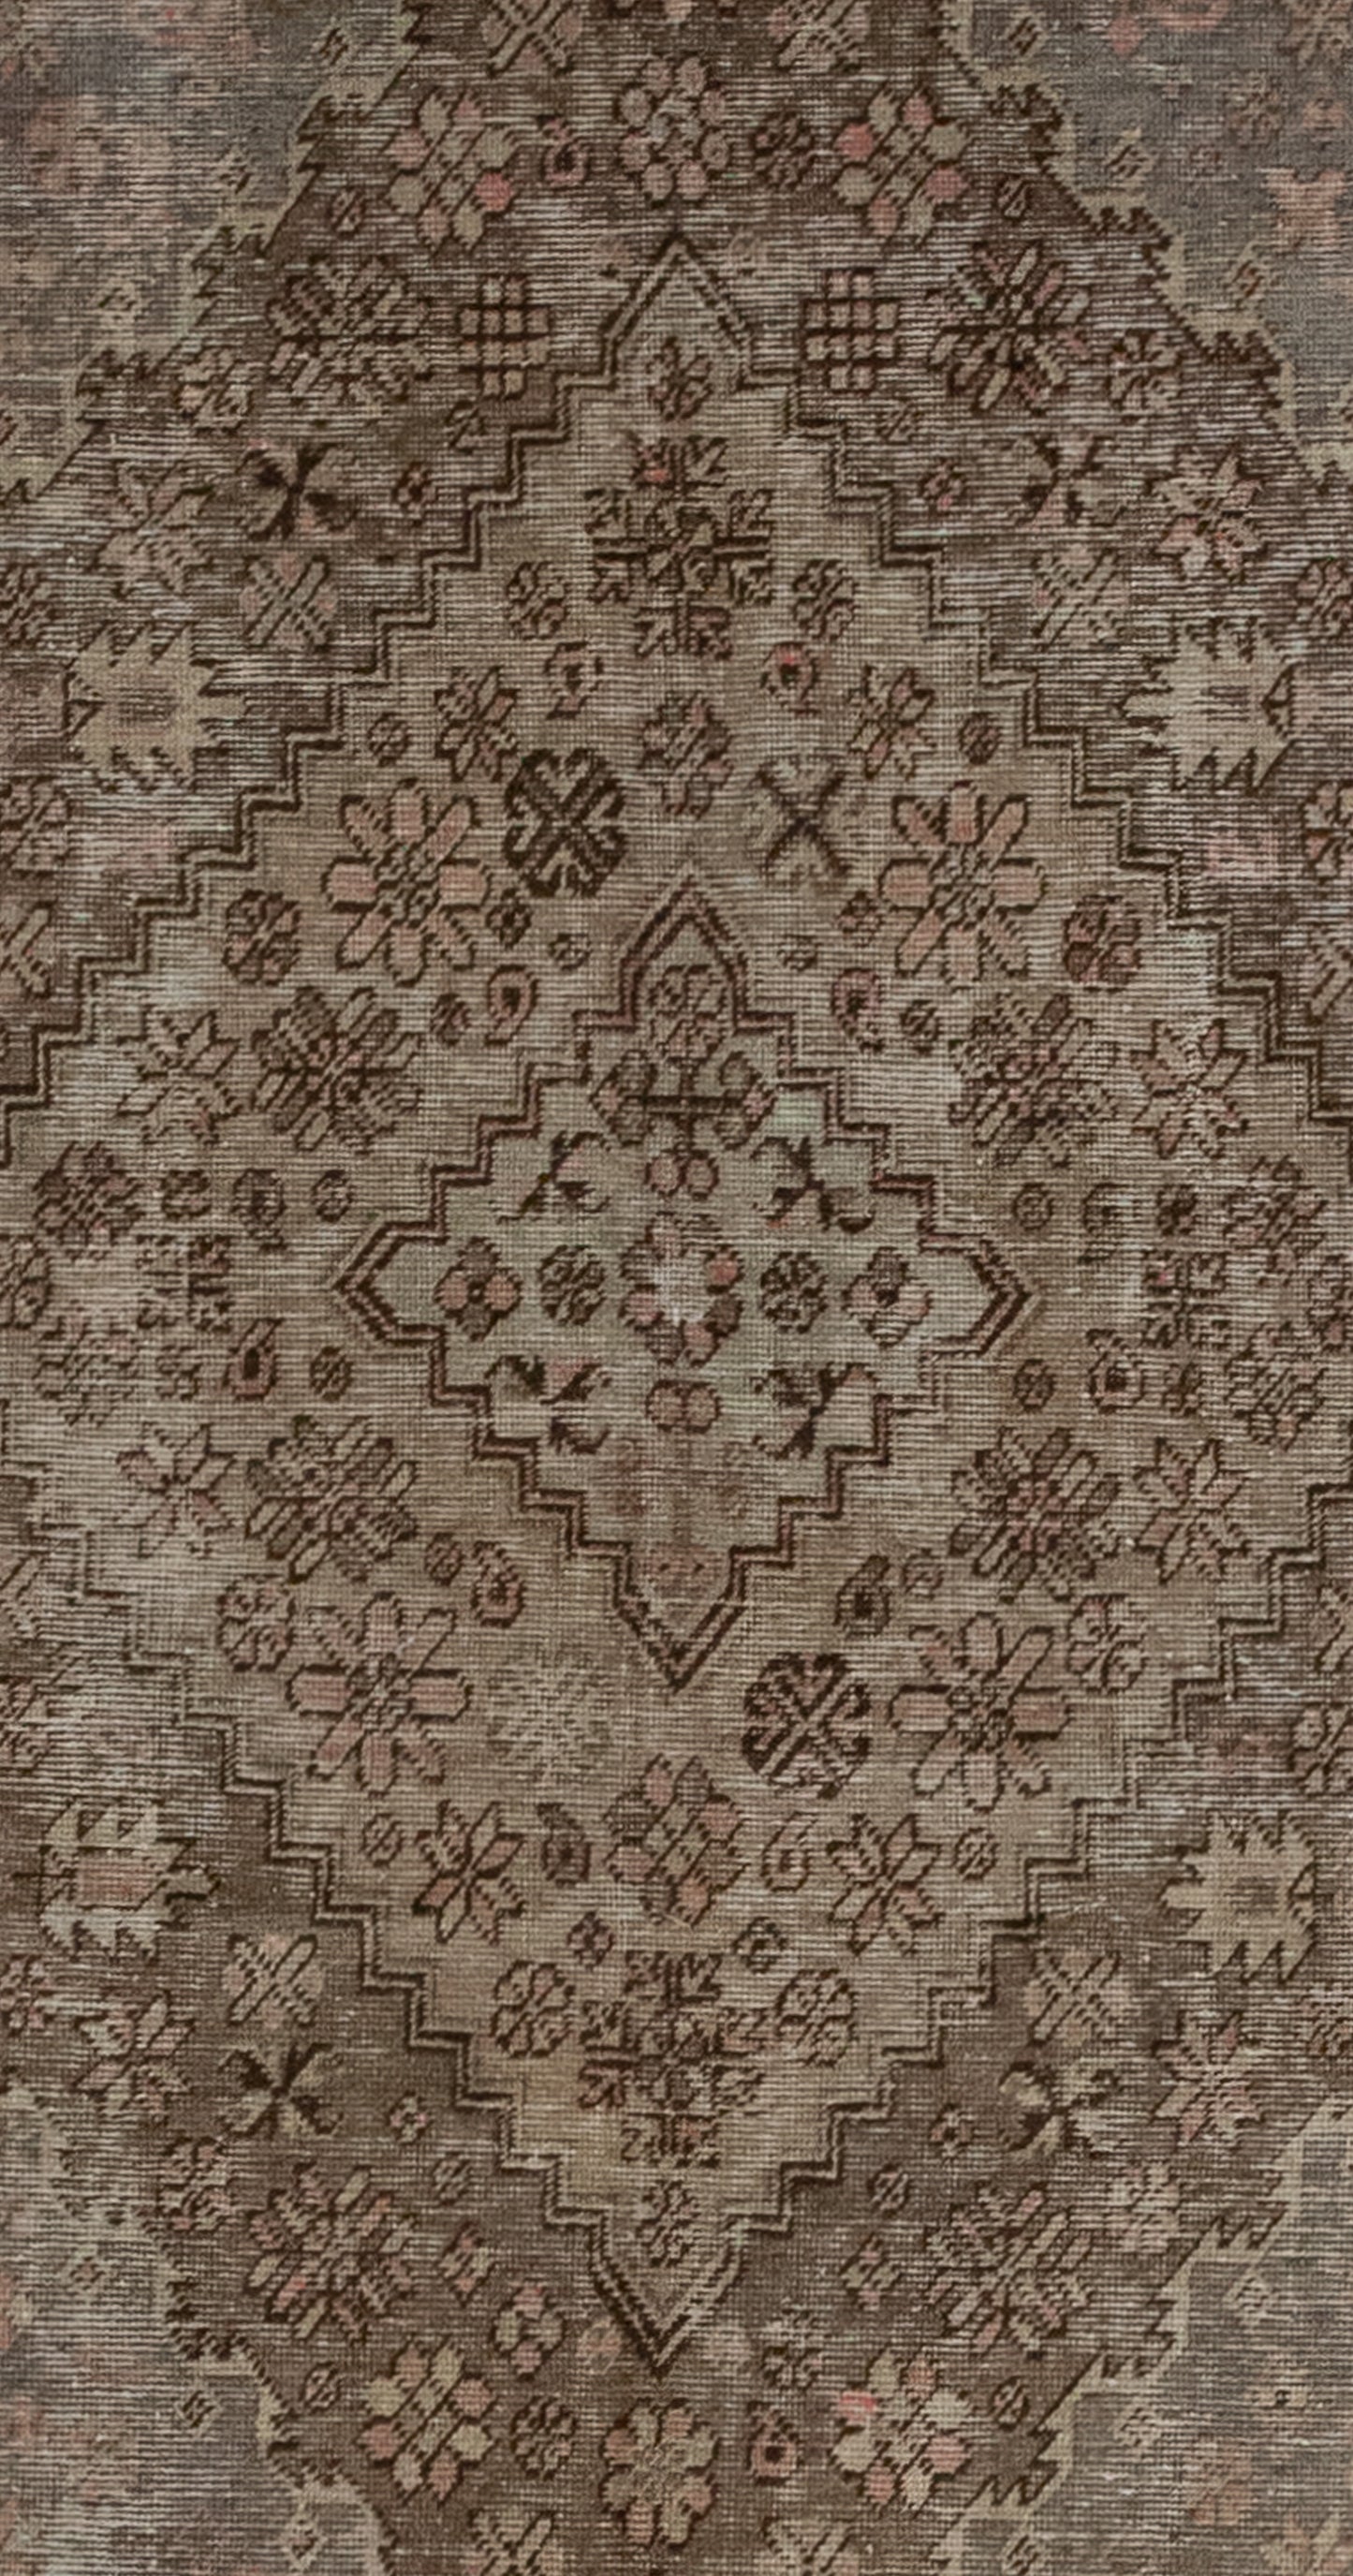 The center of the rug features a large rhomb with more nested rhombuses which are patterned with abstract types of flowers.